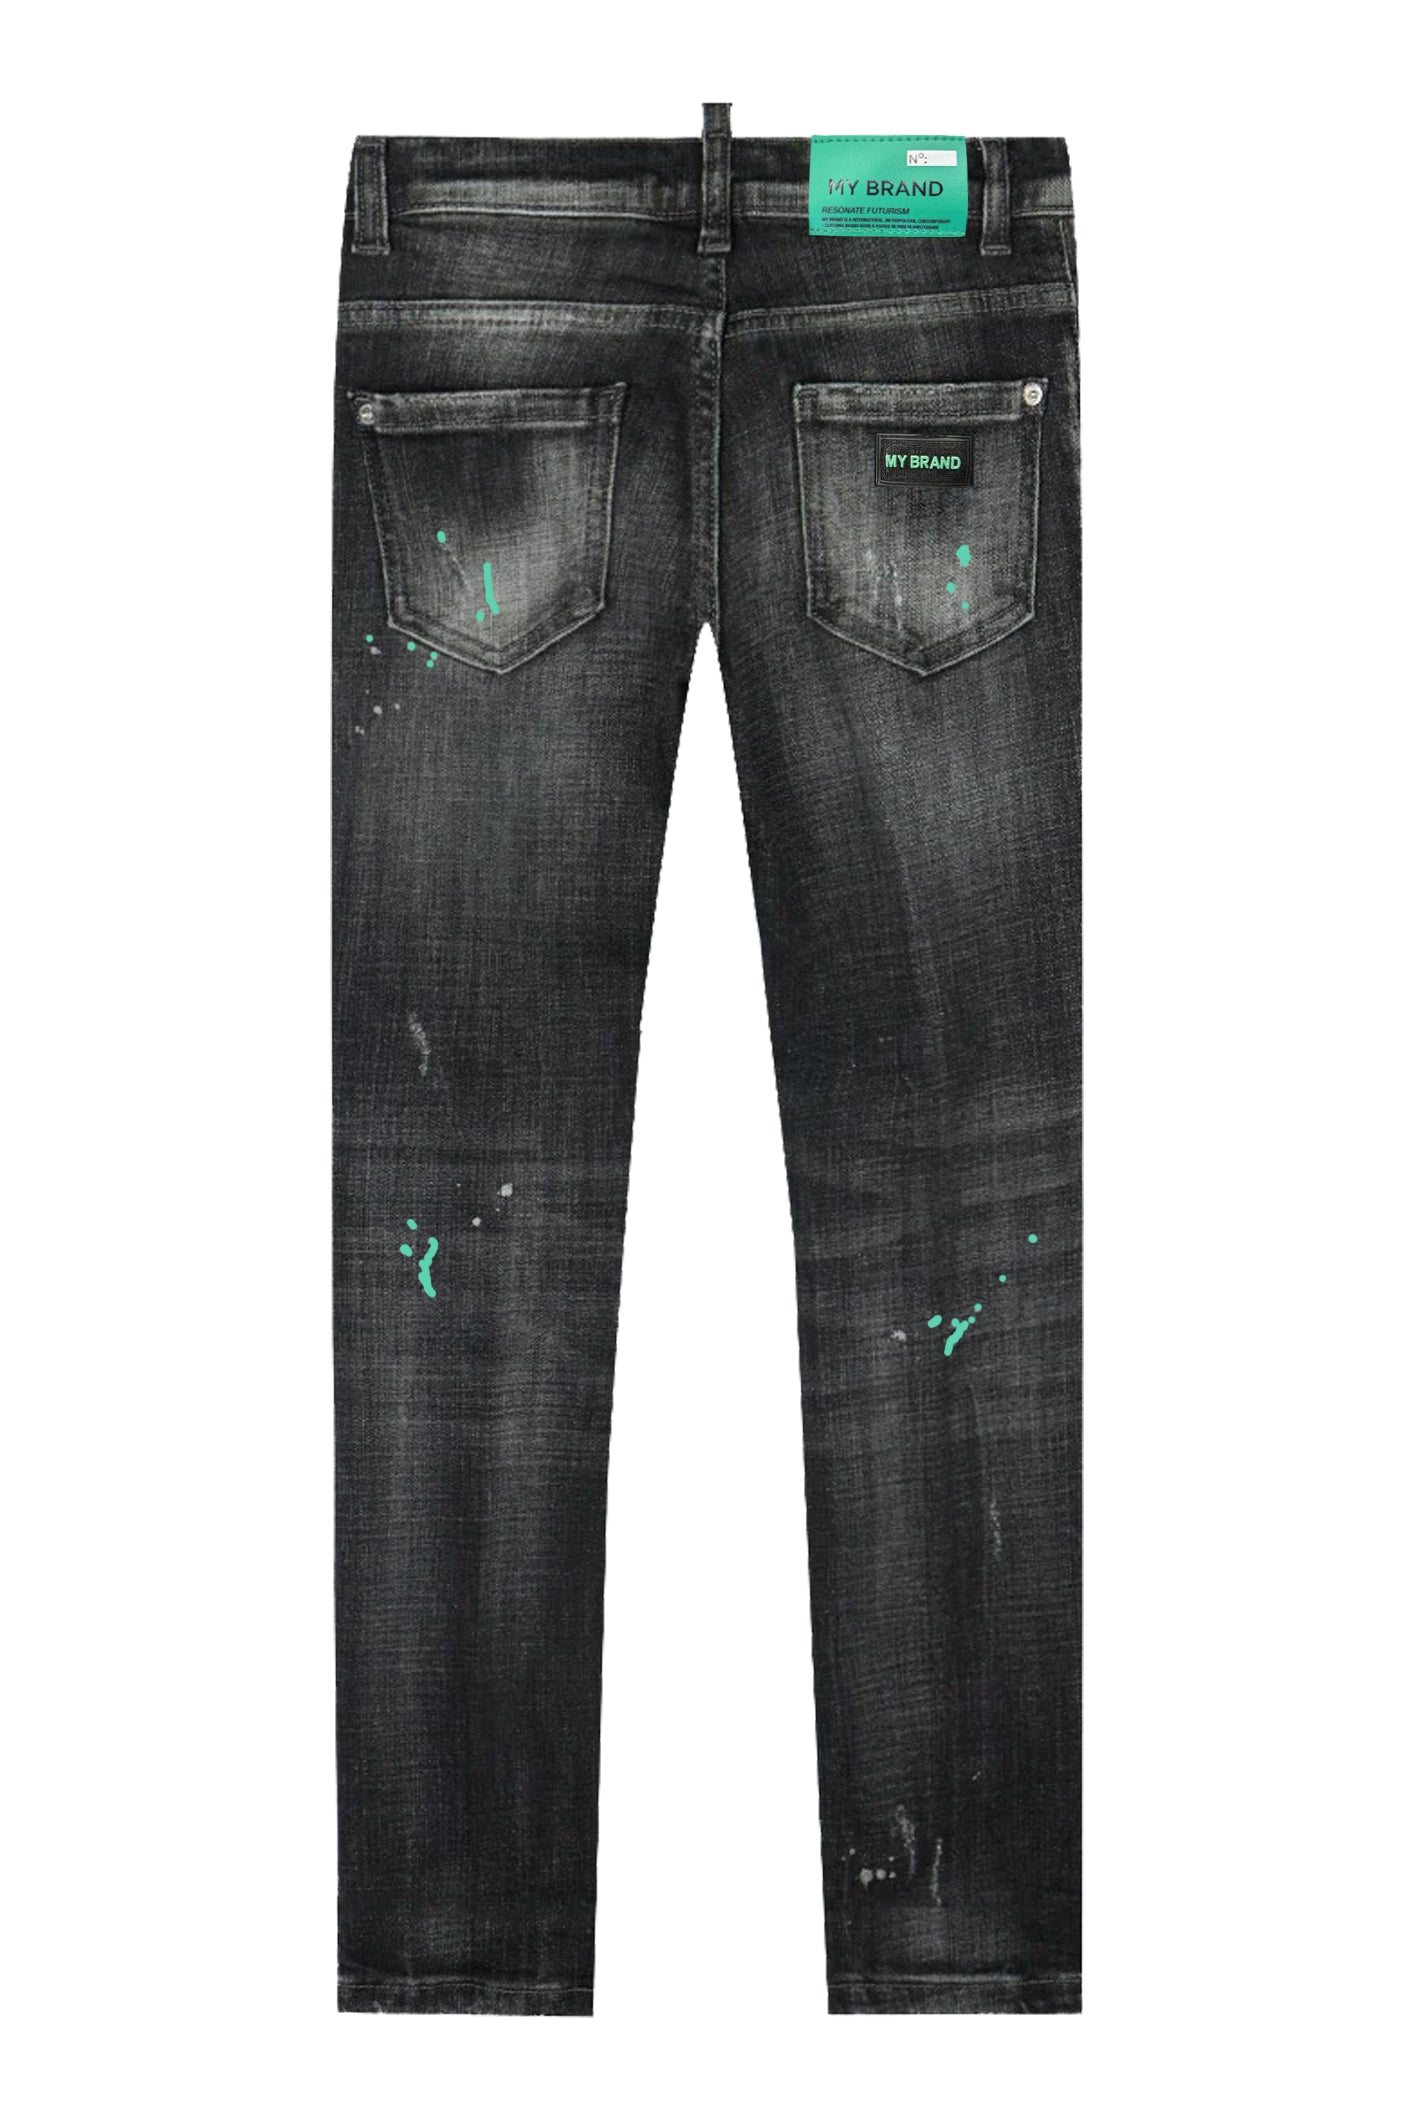 Black Distressed Neon Green Jeans